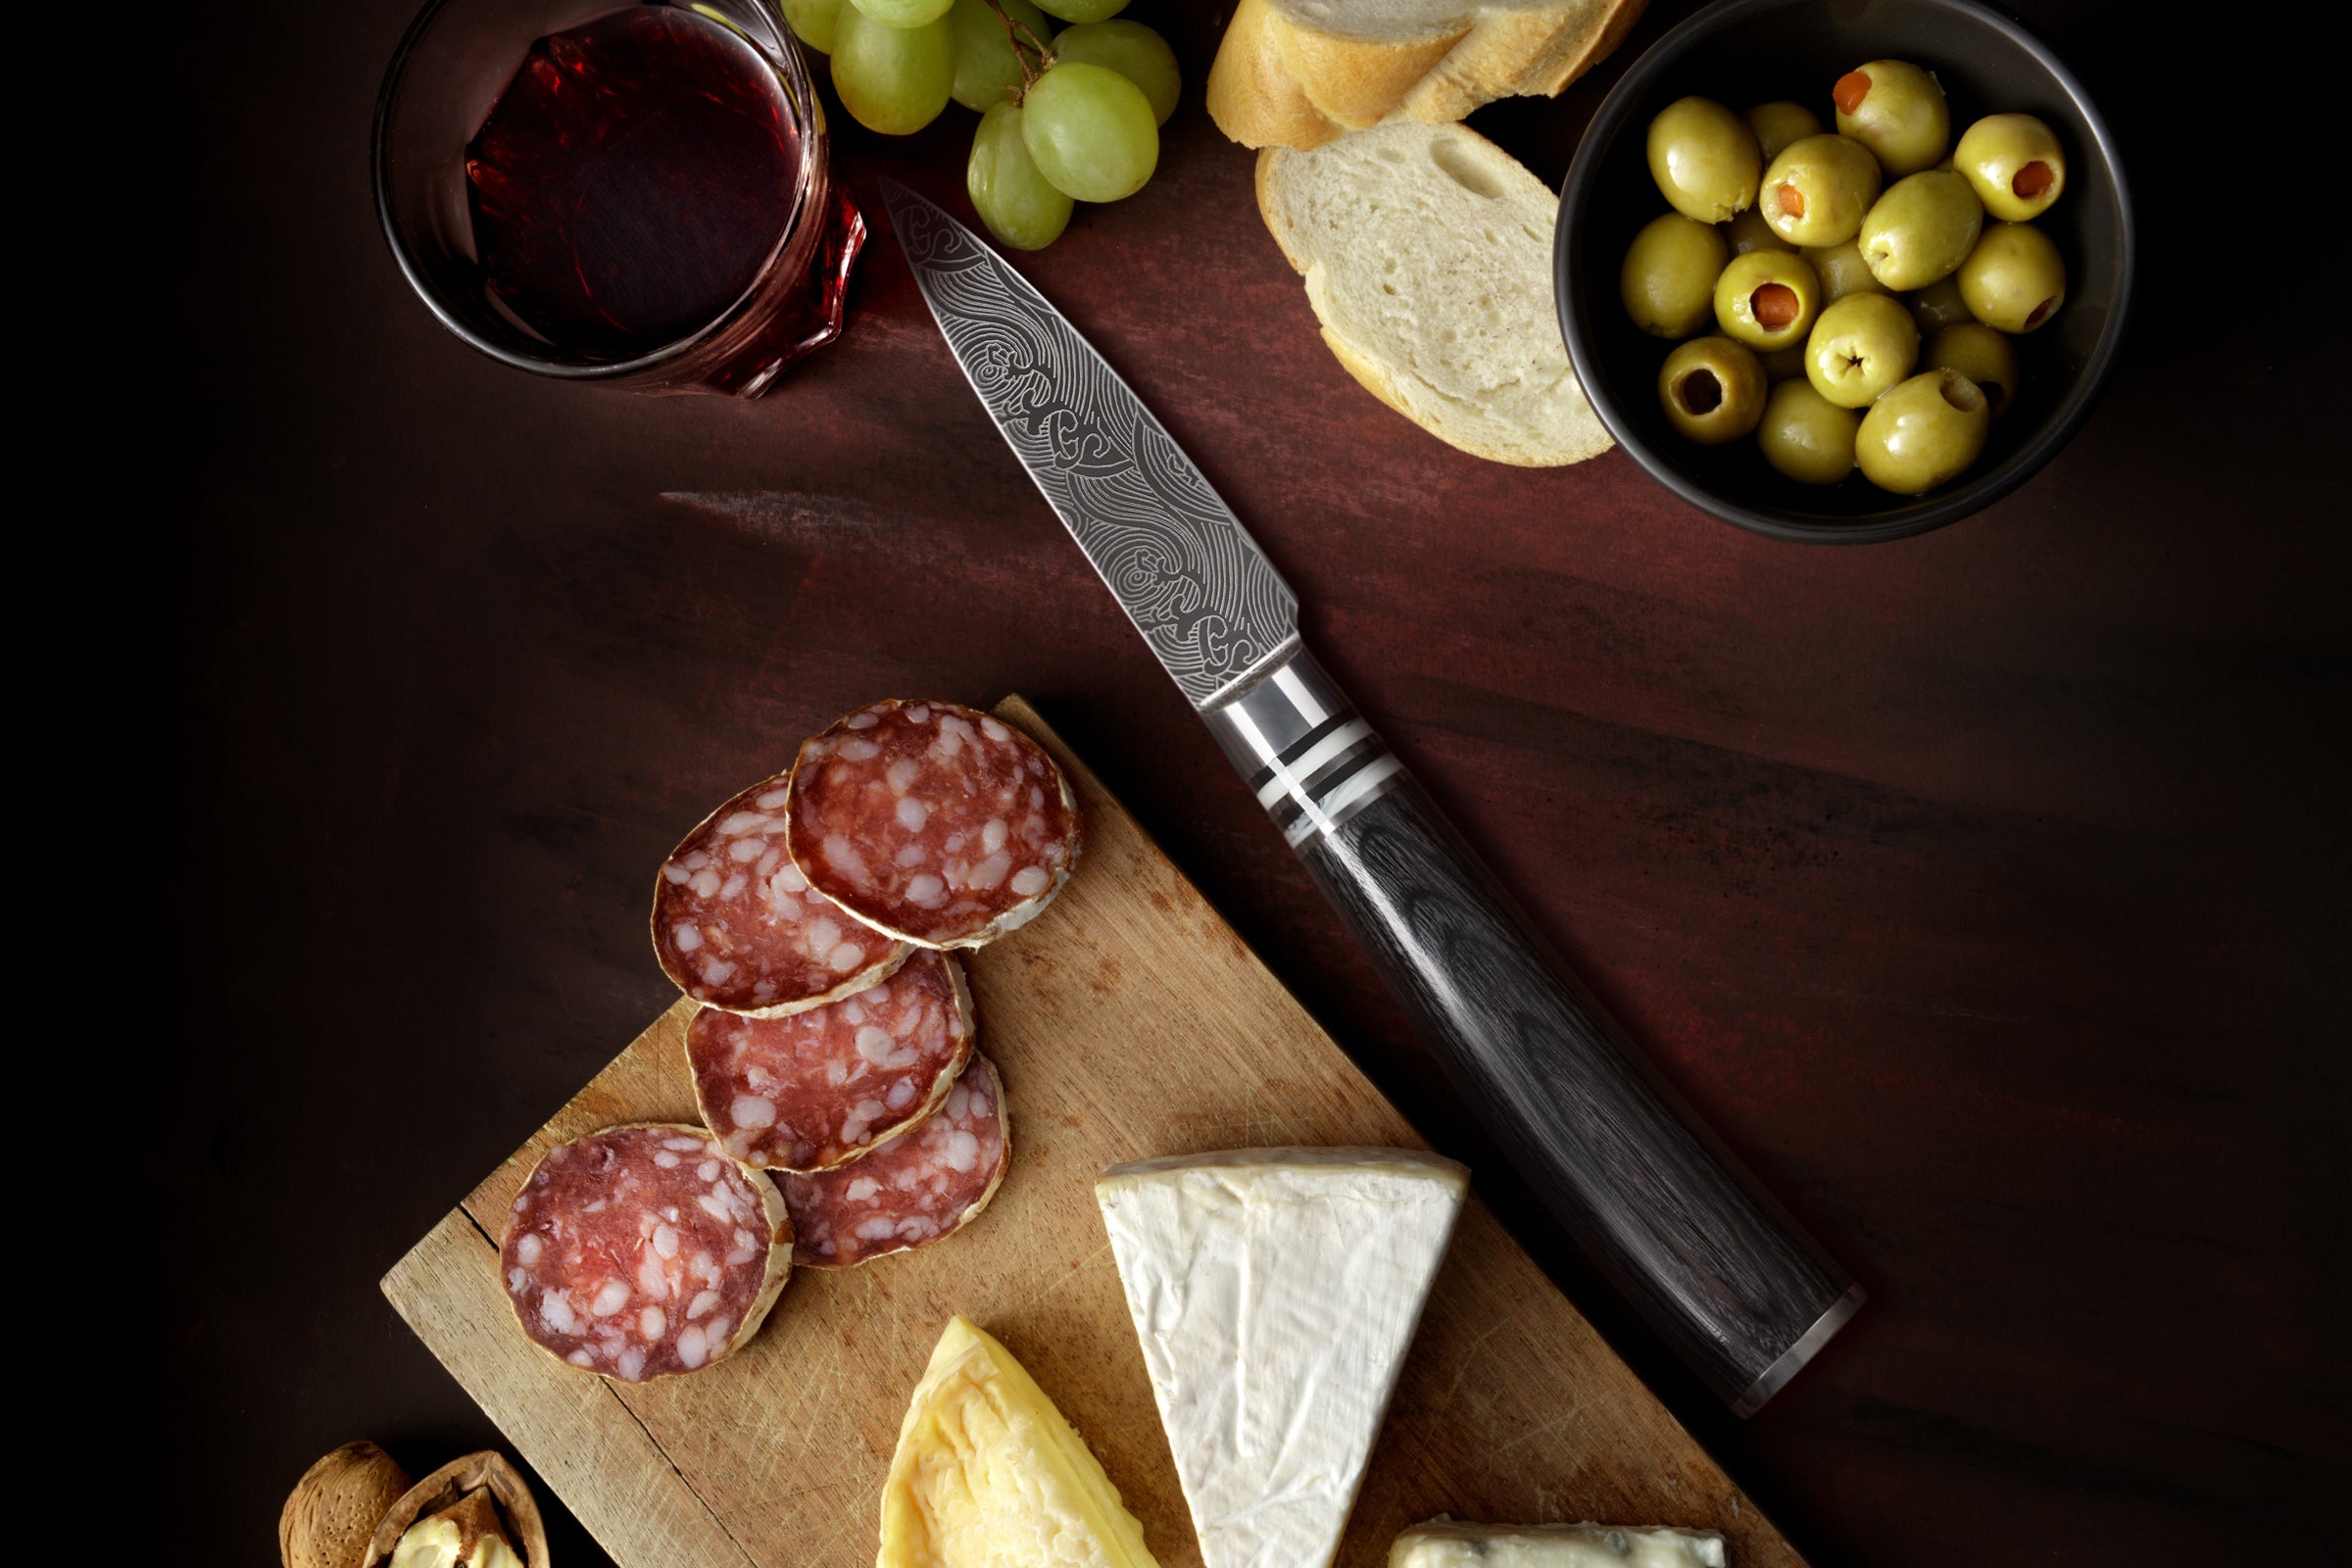 The Ronin Paring knife with slices of cured meat, bread, cheese, green grapes, and a glass of red wine.